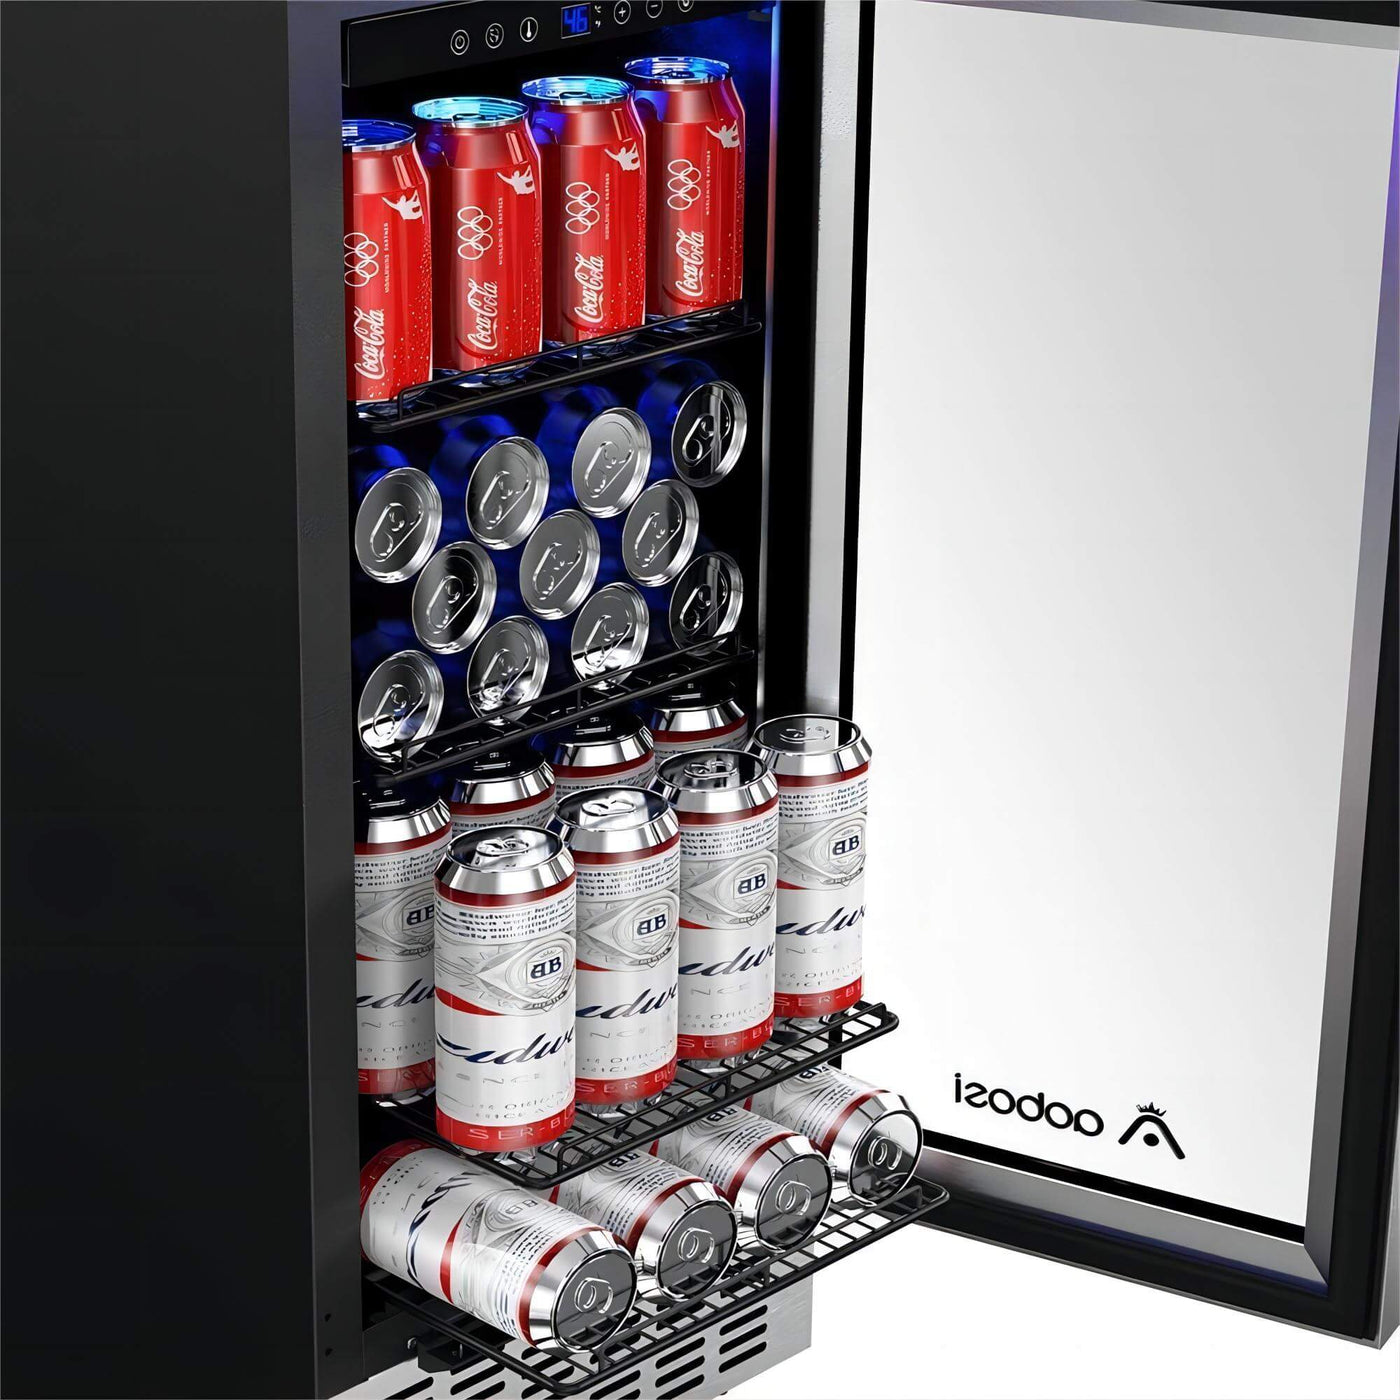 AOBOSI 15 inch Beverage Refrigerator 94 Cans